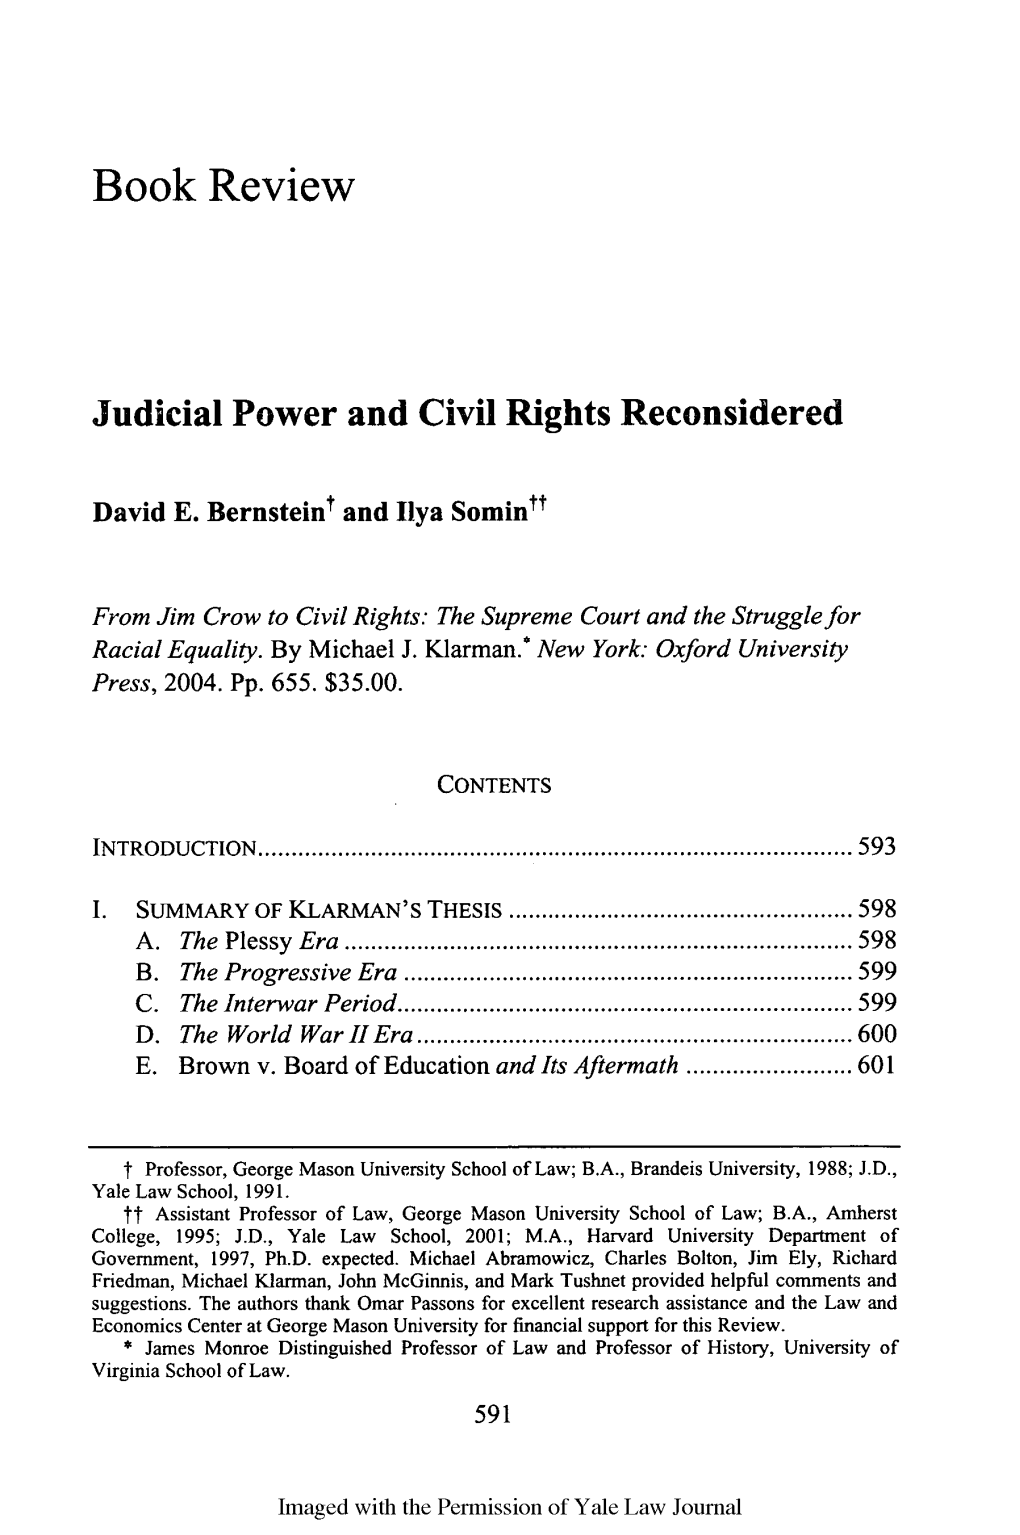 Judicial Power and Civil Rights Reconsidered